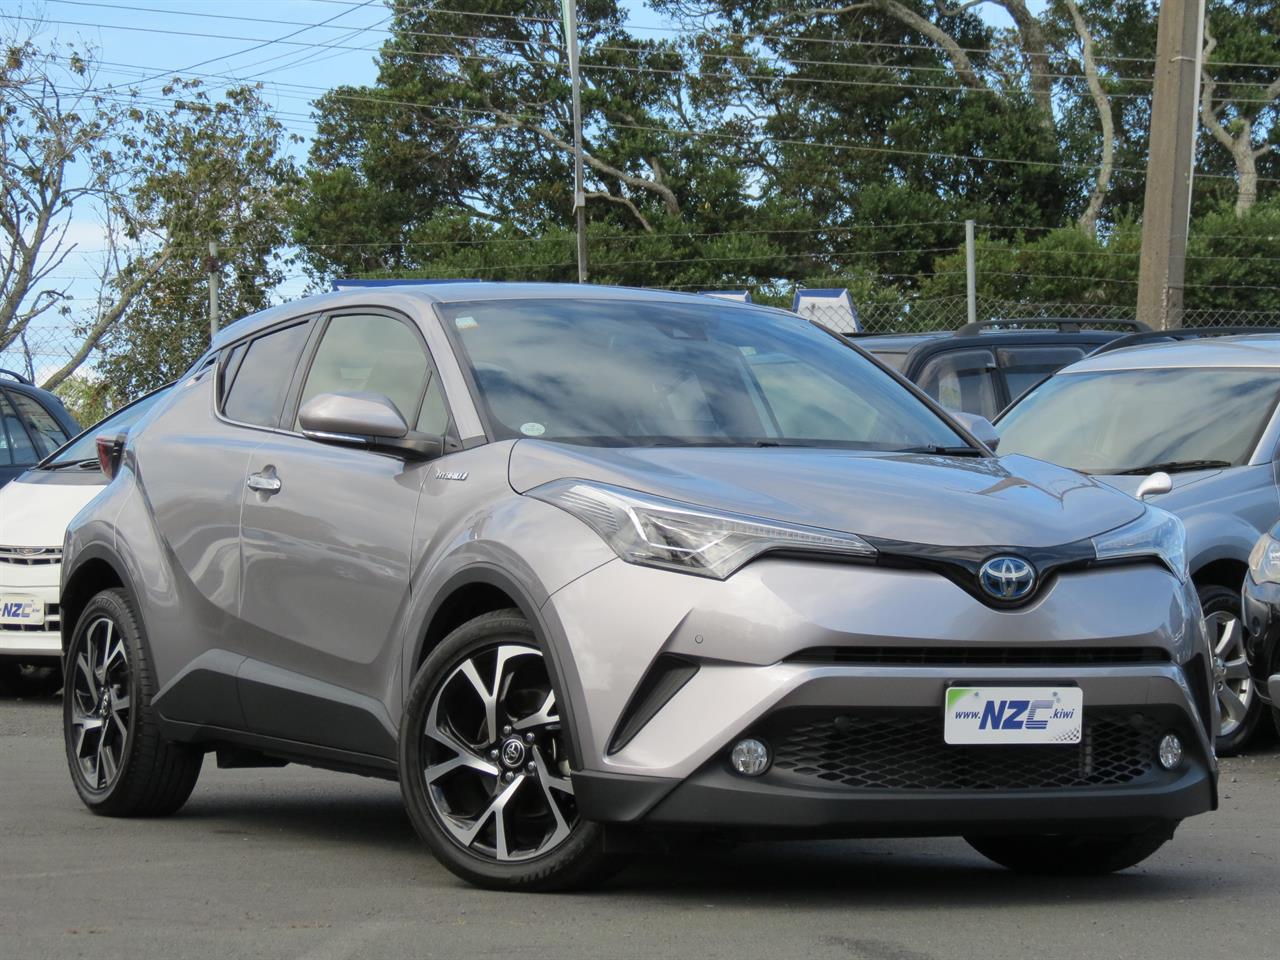 NZC best hot price for 2018 Toyota C-HR in Auckland